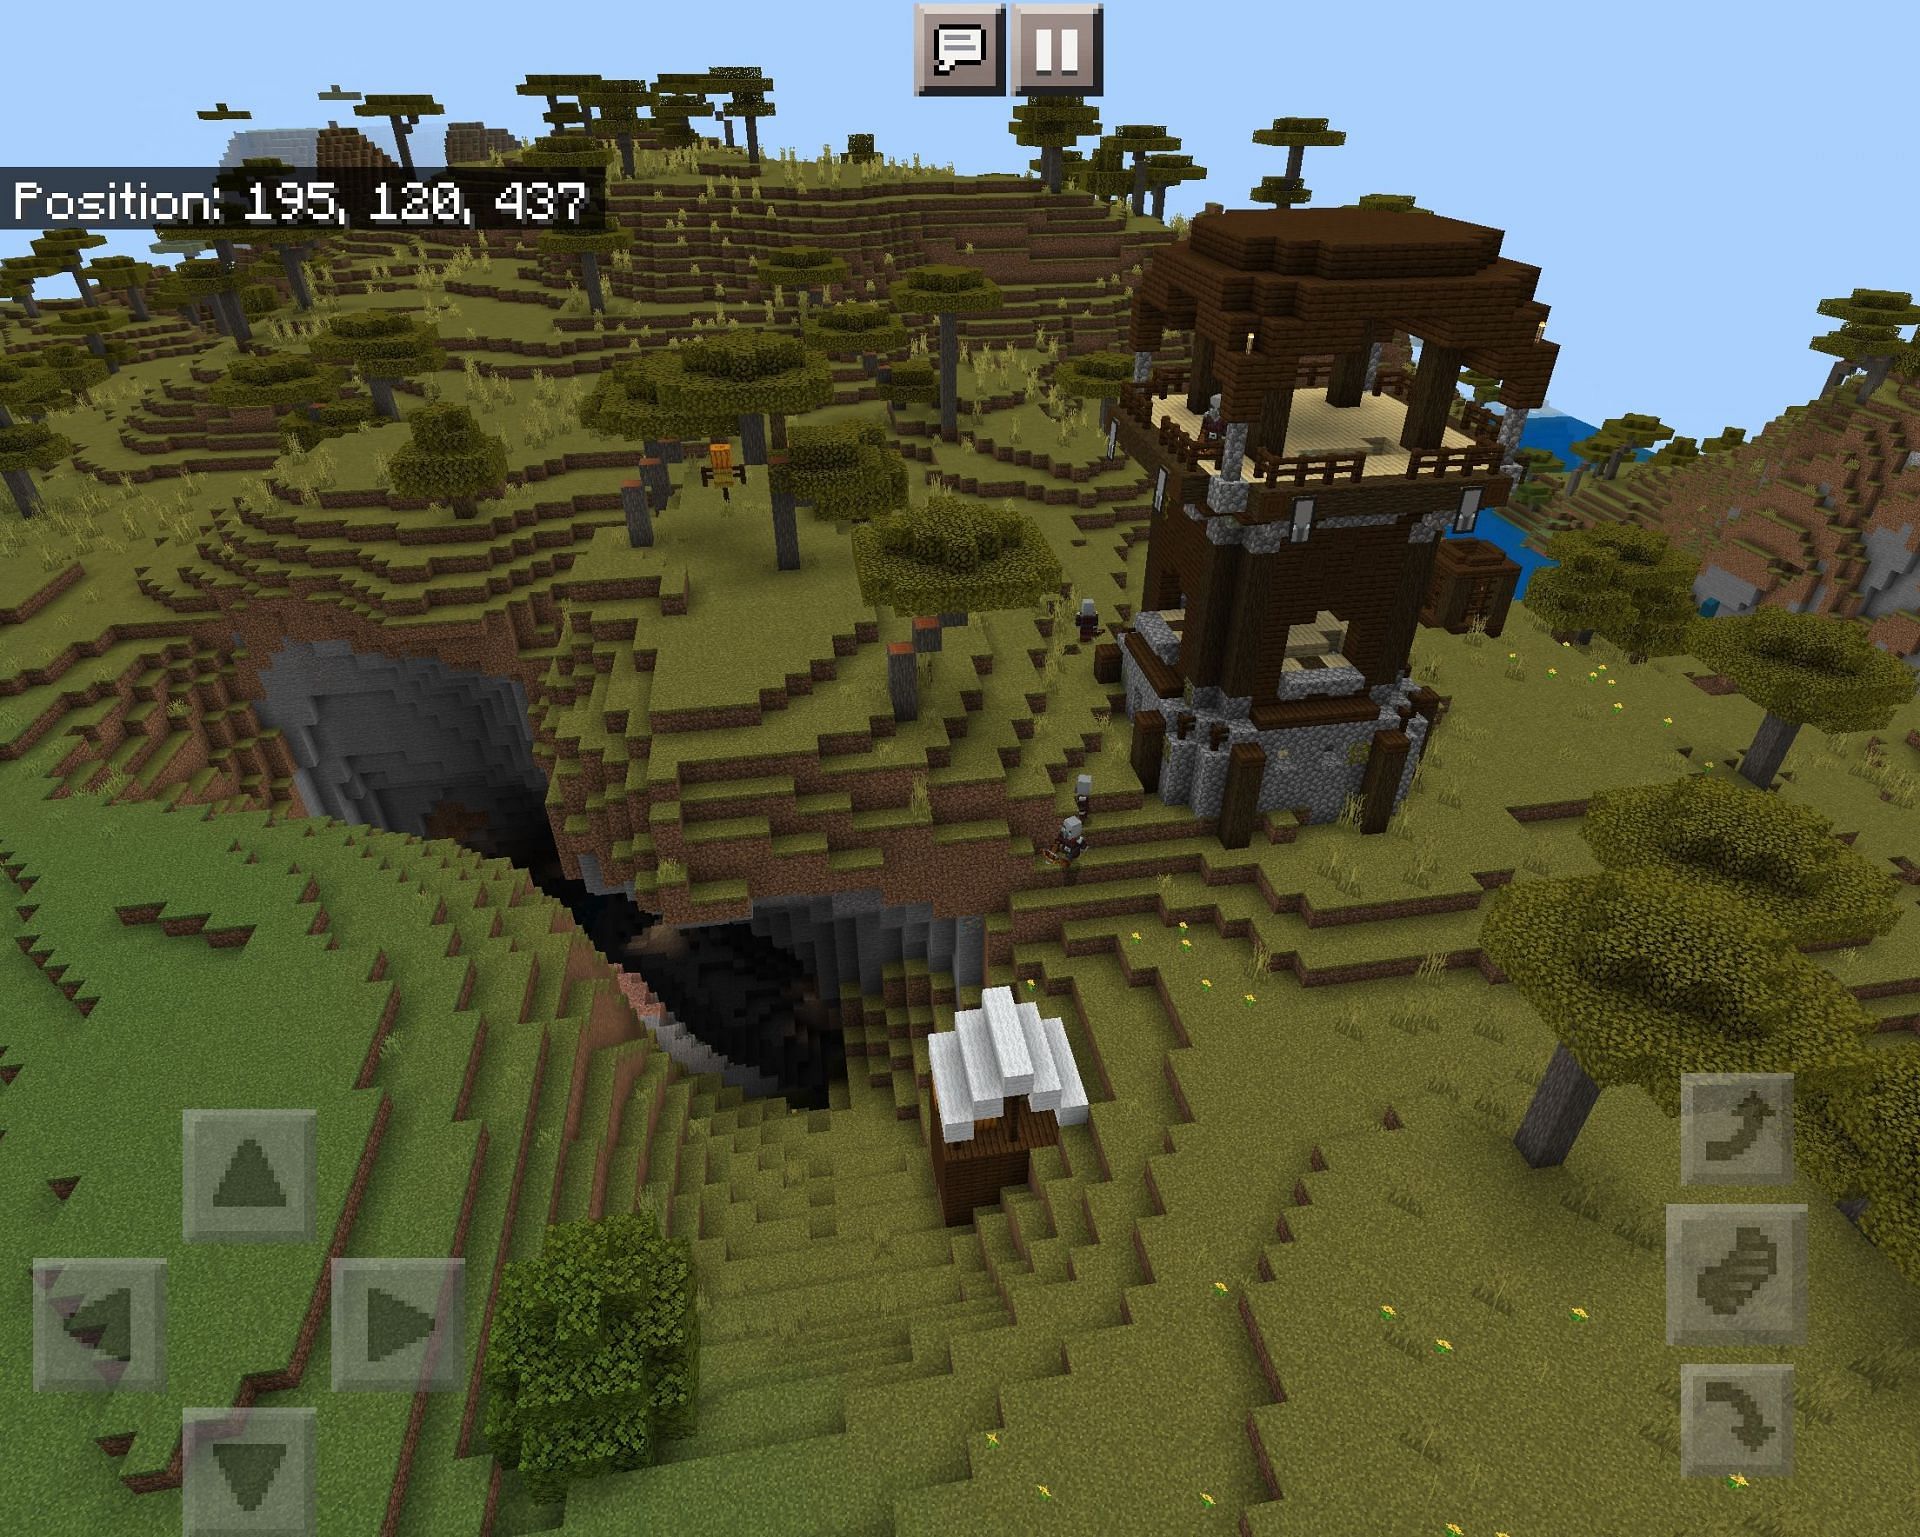 A pillager outpost found on the seed (Image via Minecraft)